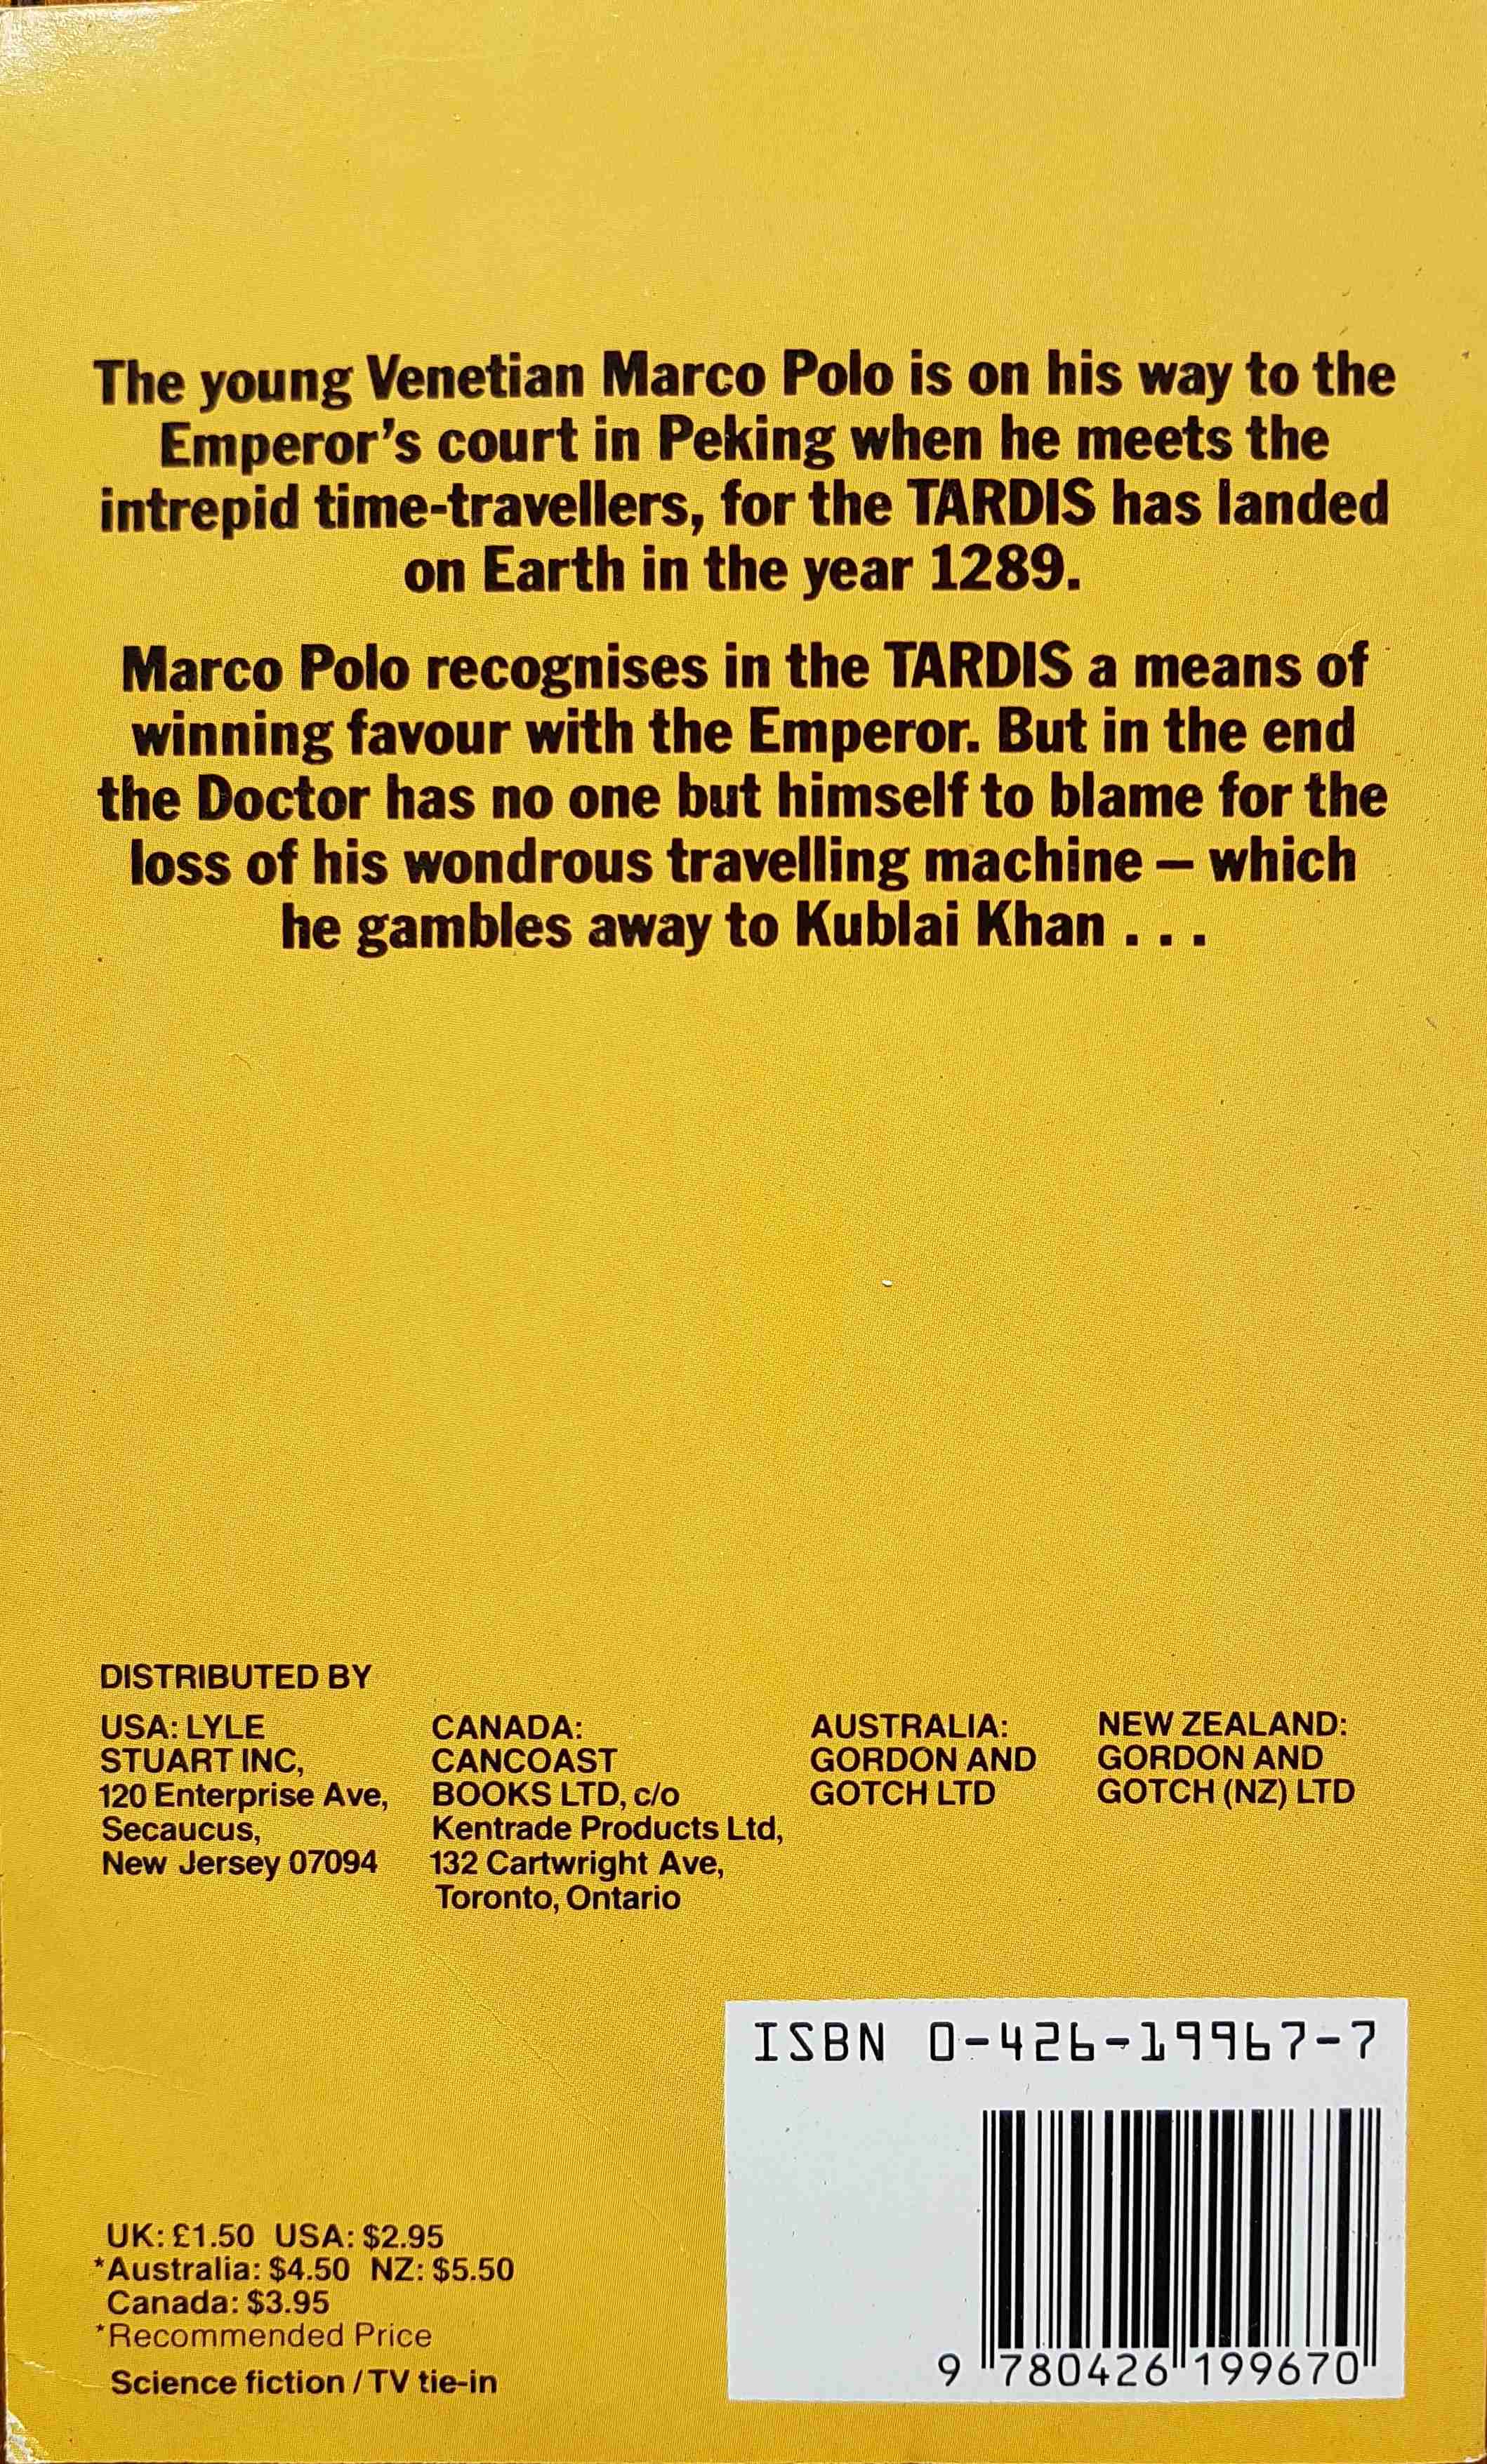 Picture of 0-426-19967-7 Doctor Who - Marco Polo by artist John Lucarotti from the BBC records and Tapes library